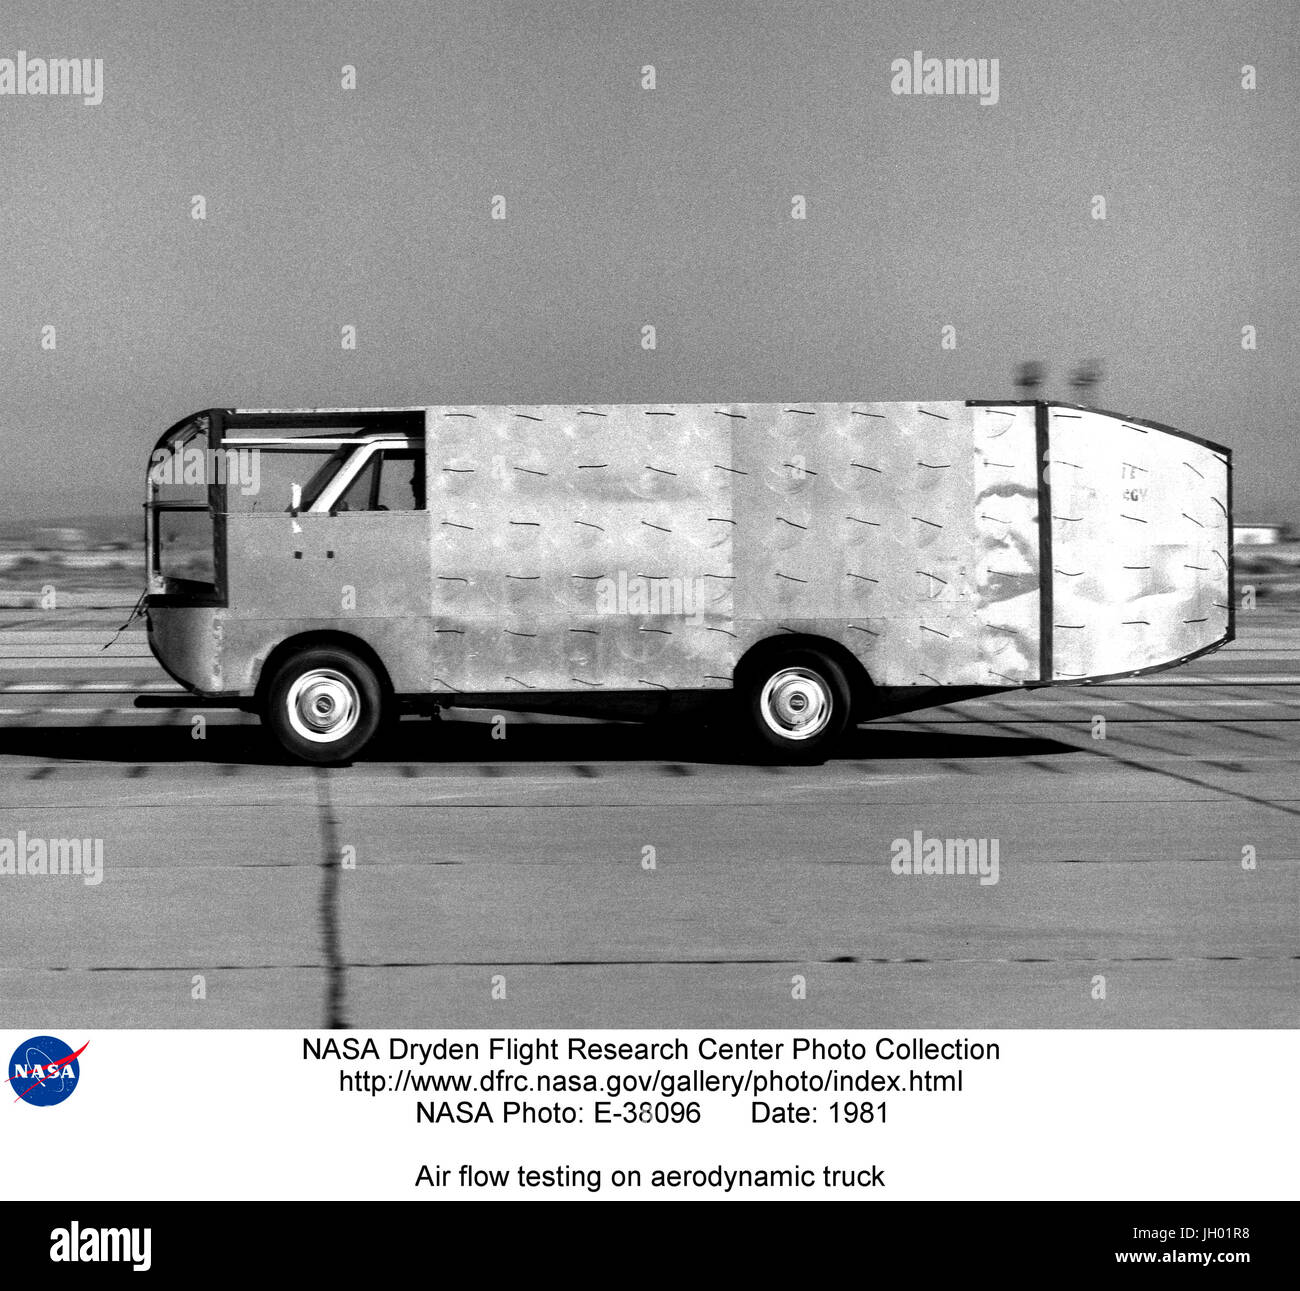 This photograph illustrates a standard passenger van modified at the Dryden Flight Research Center to investigate the aerodynamics of trucks. The resulting vehicle--re-fashioned with sheet metal--resembled a motor home, with rounded vertical corners on the vehicle's front and rear sections. For subsequent tests, researchers installed a 'boat tail' structure, shown in the photograph.During a decade spanning the 1970s and 1980s, Dryden researchers conducted tests to determine the extent to which adjustments in the shape of trucks reduced aerodynamic drag and improved efficiency. During the tests Stock Photo